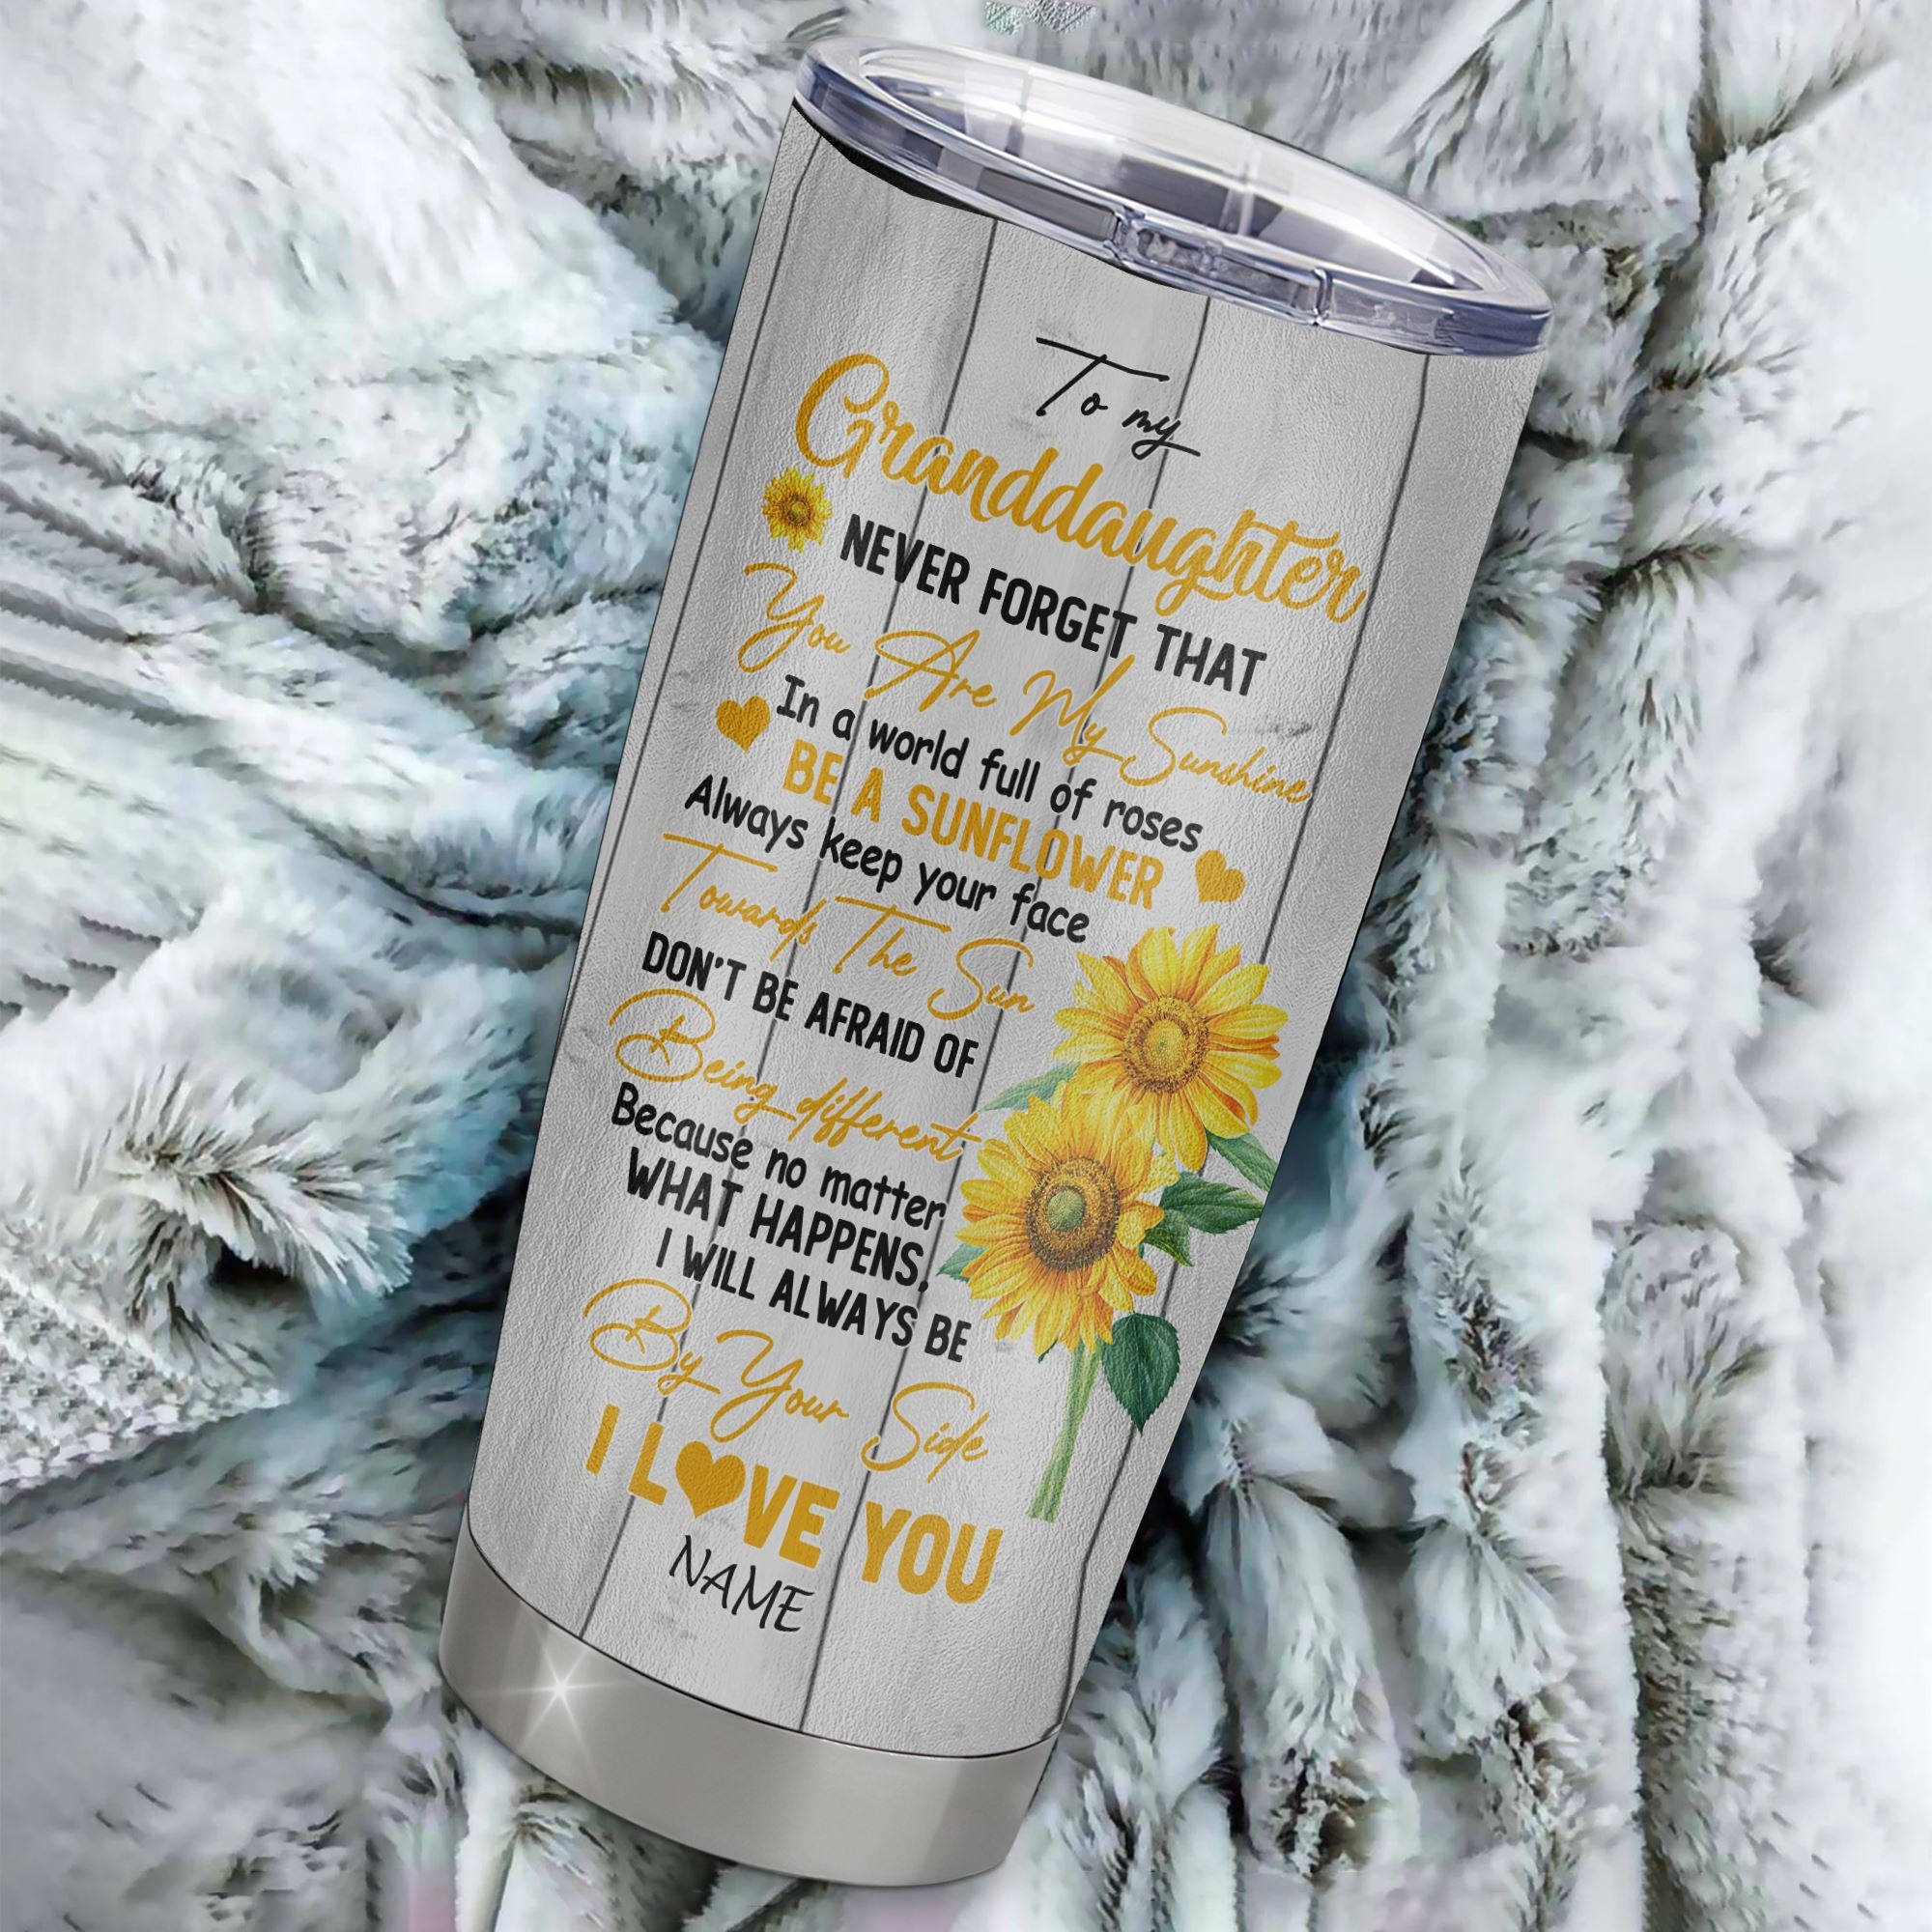 Personalized_To_My_Granddaughter_From_Grandma_Stainless_Steel_Tumbler_Cup_Never_Forget_You_Are_My_Sunshine_Sunflower_Granddaughter_Birthday_Christmas_Travel_Mug_Tumbler_mockup_1.jpg